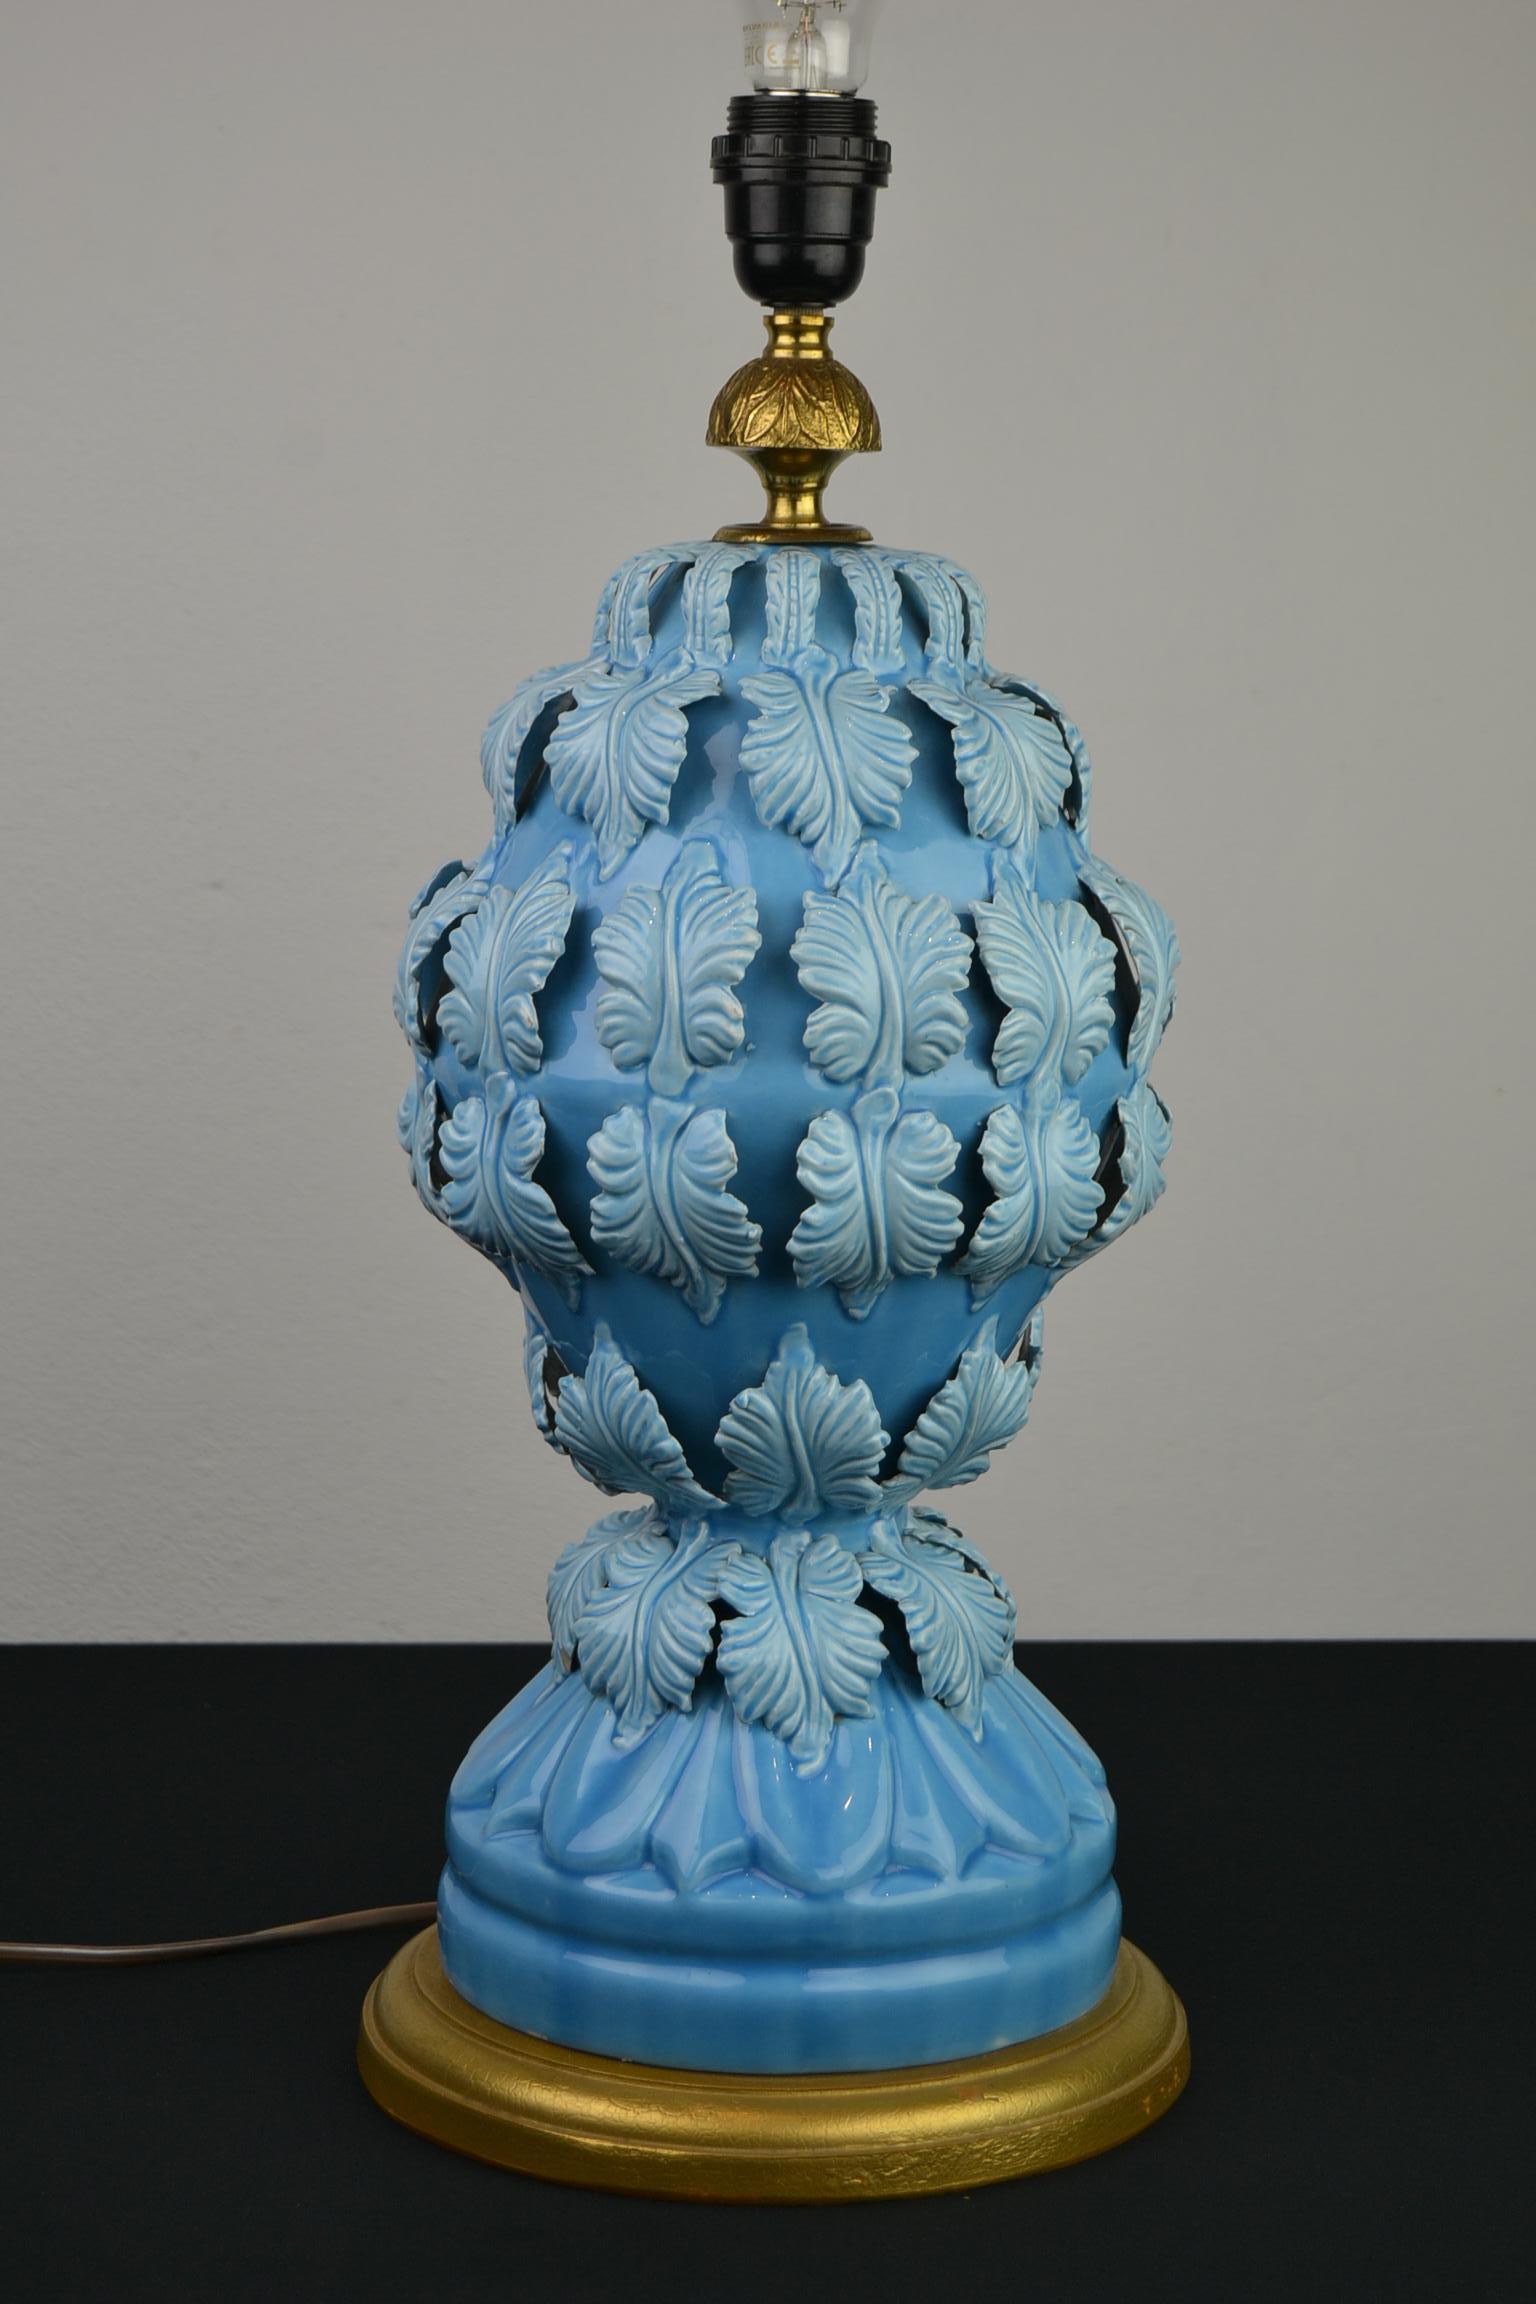 Blue ceramic table lamp with leaves by Ceramics Manises Spain. 
This light blue - turquoise ceramic table lamp has beautiful leaves all around 
and is mounted on a gilded wooden base. 
A blue lacquer or blue glazed sculptural ceramic table light